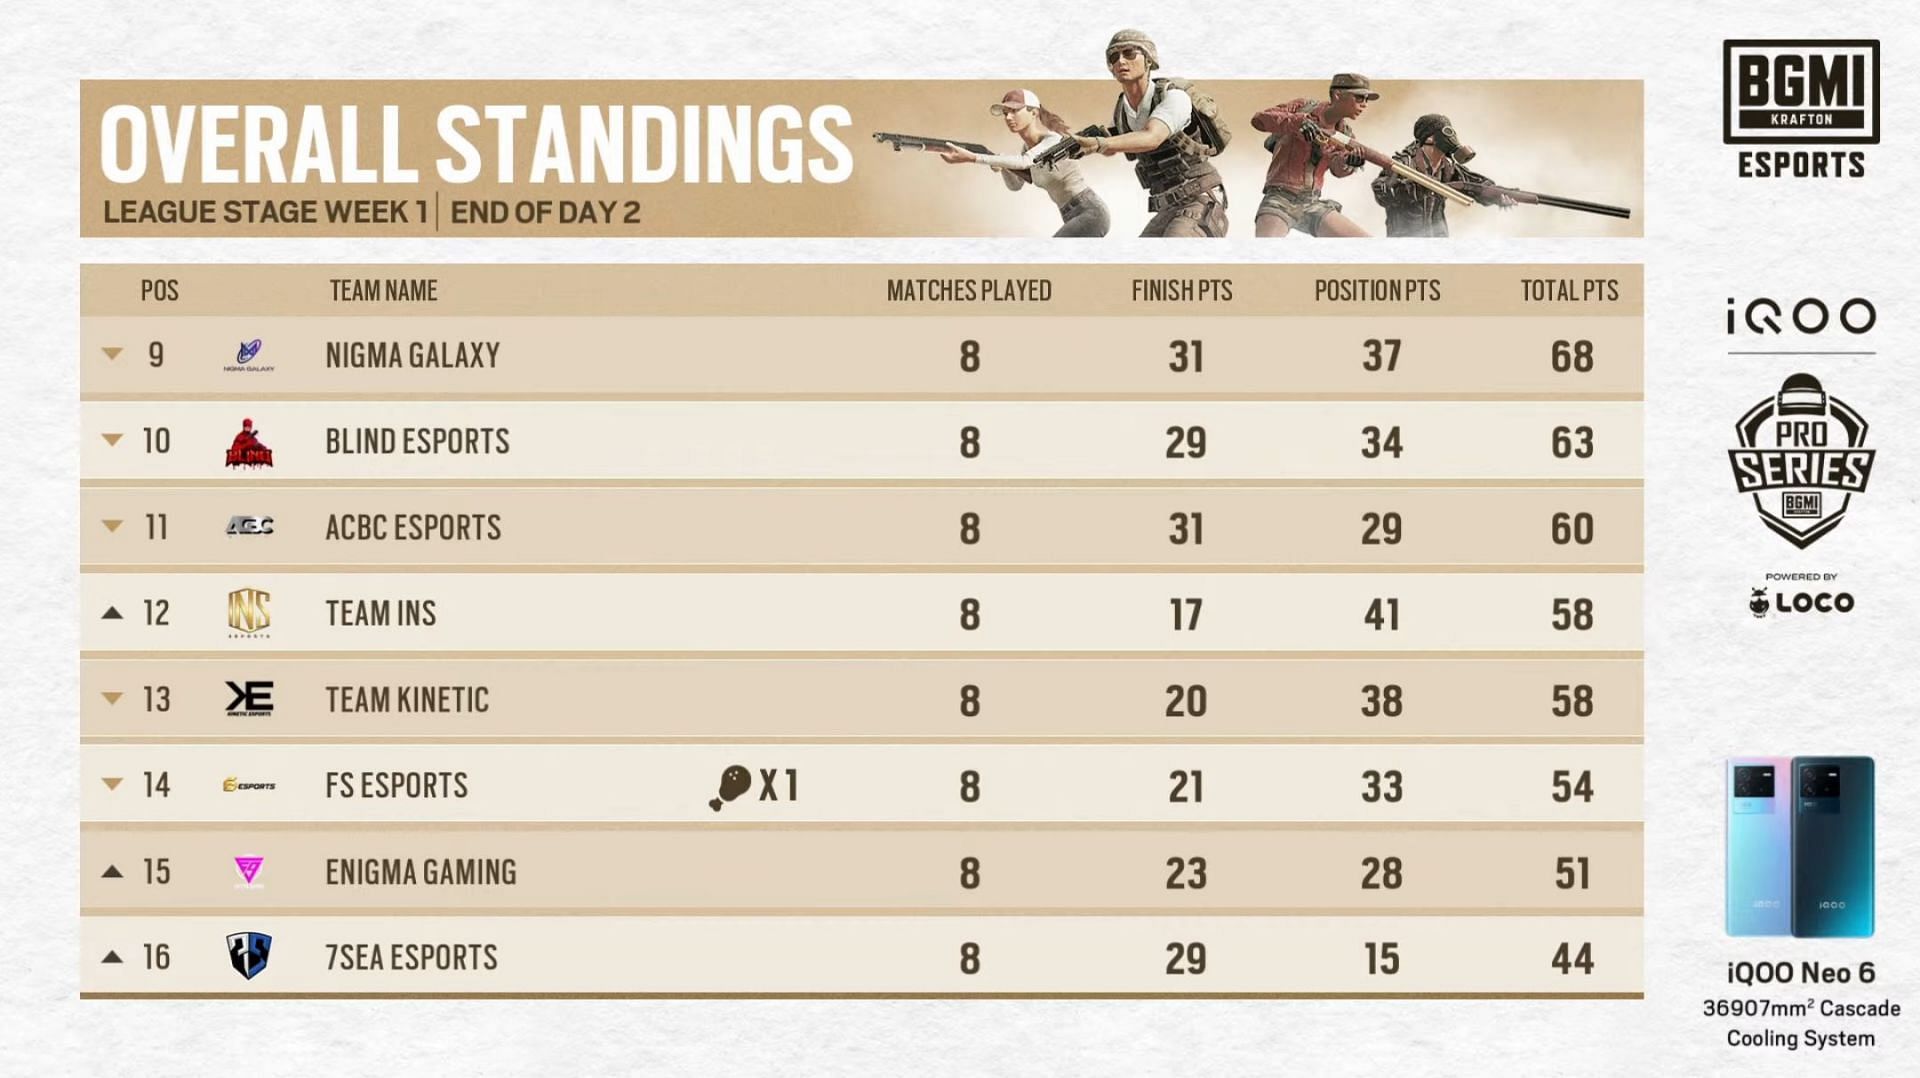 Nigma Galaxy grabbed 11th place after BMPS League day 2 (Image via BGMI)